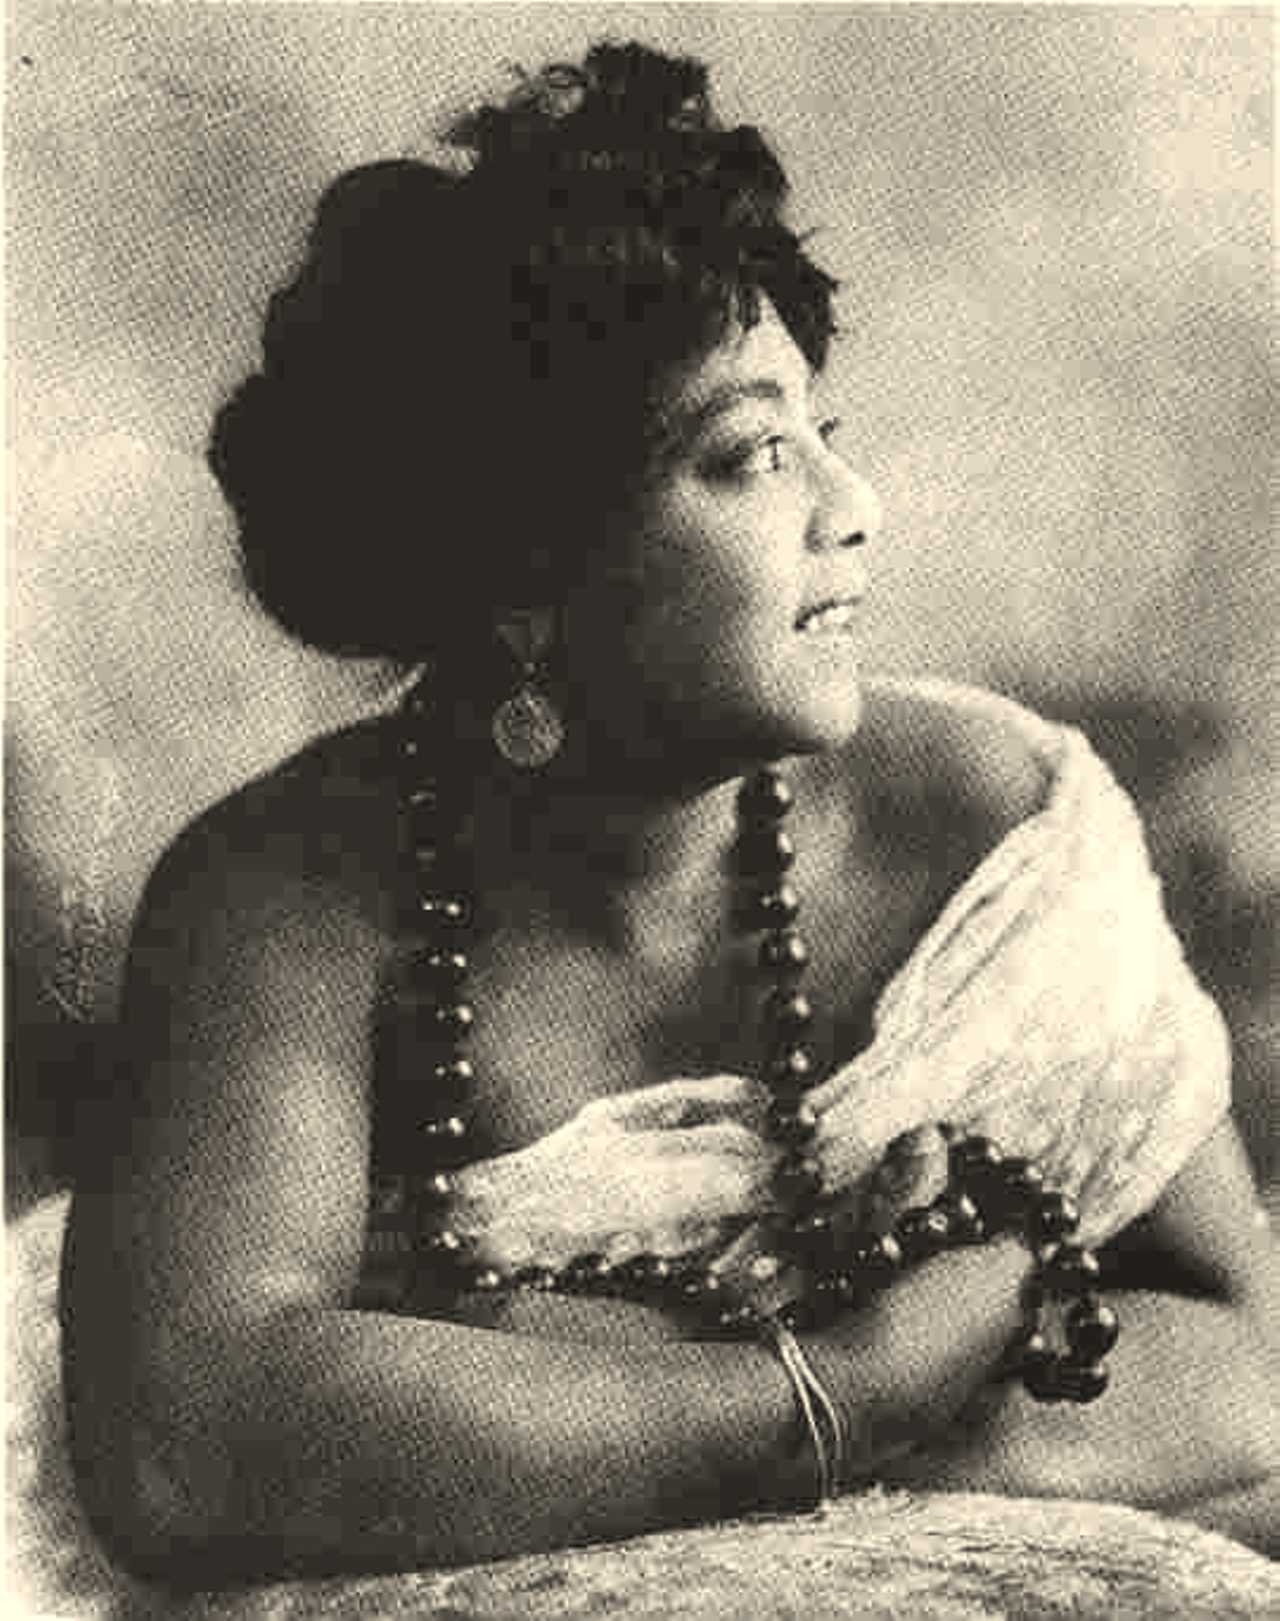 Mamie Smith
First Lady of Blues Mamie Smith was born in Cincinnati in 1891. She was a jazz and blues singer, dancer, pianist and actress. On Valentine’s Day in 1920, Smith recorded  "That Thing Called Love" and "You Can't Keep a Good Man Down" for the Okeh record label, breaking down color barriers to become the first African American artist to record blues songs. The success of Smith’s record opened doors for other Black artists to record. Her most famous record, Crazy Blues, was inducted into the Grammy Hall of Fame in 1994. She also had a small career in film, appearing in Jailhouse Blues, Paradise in Harlem and Sunday Sinners, among other films.